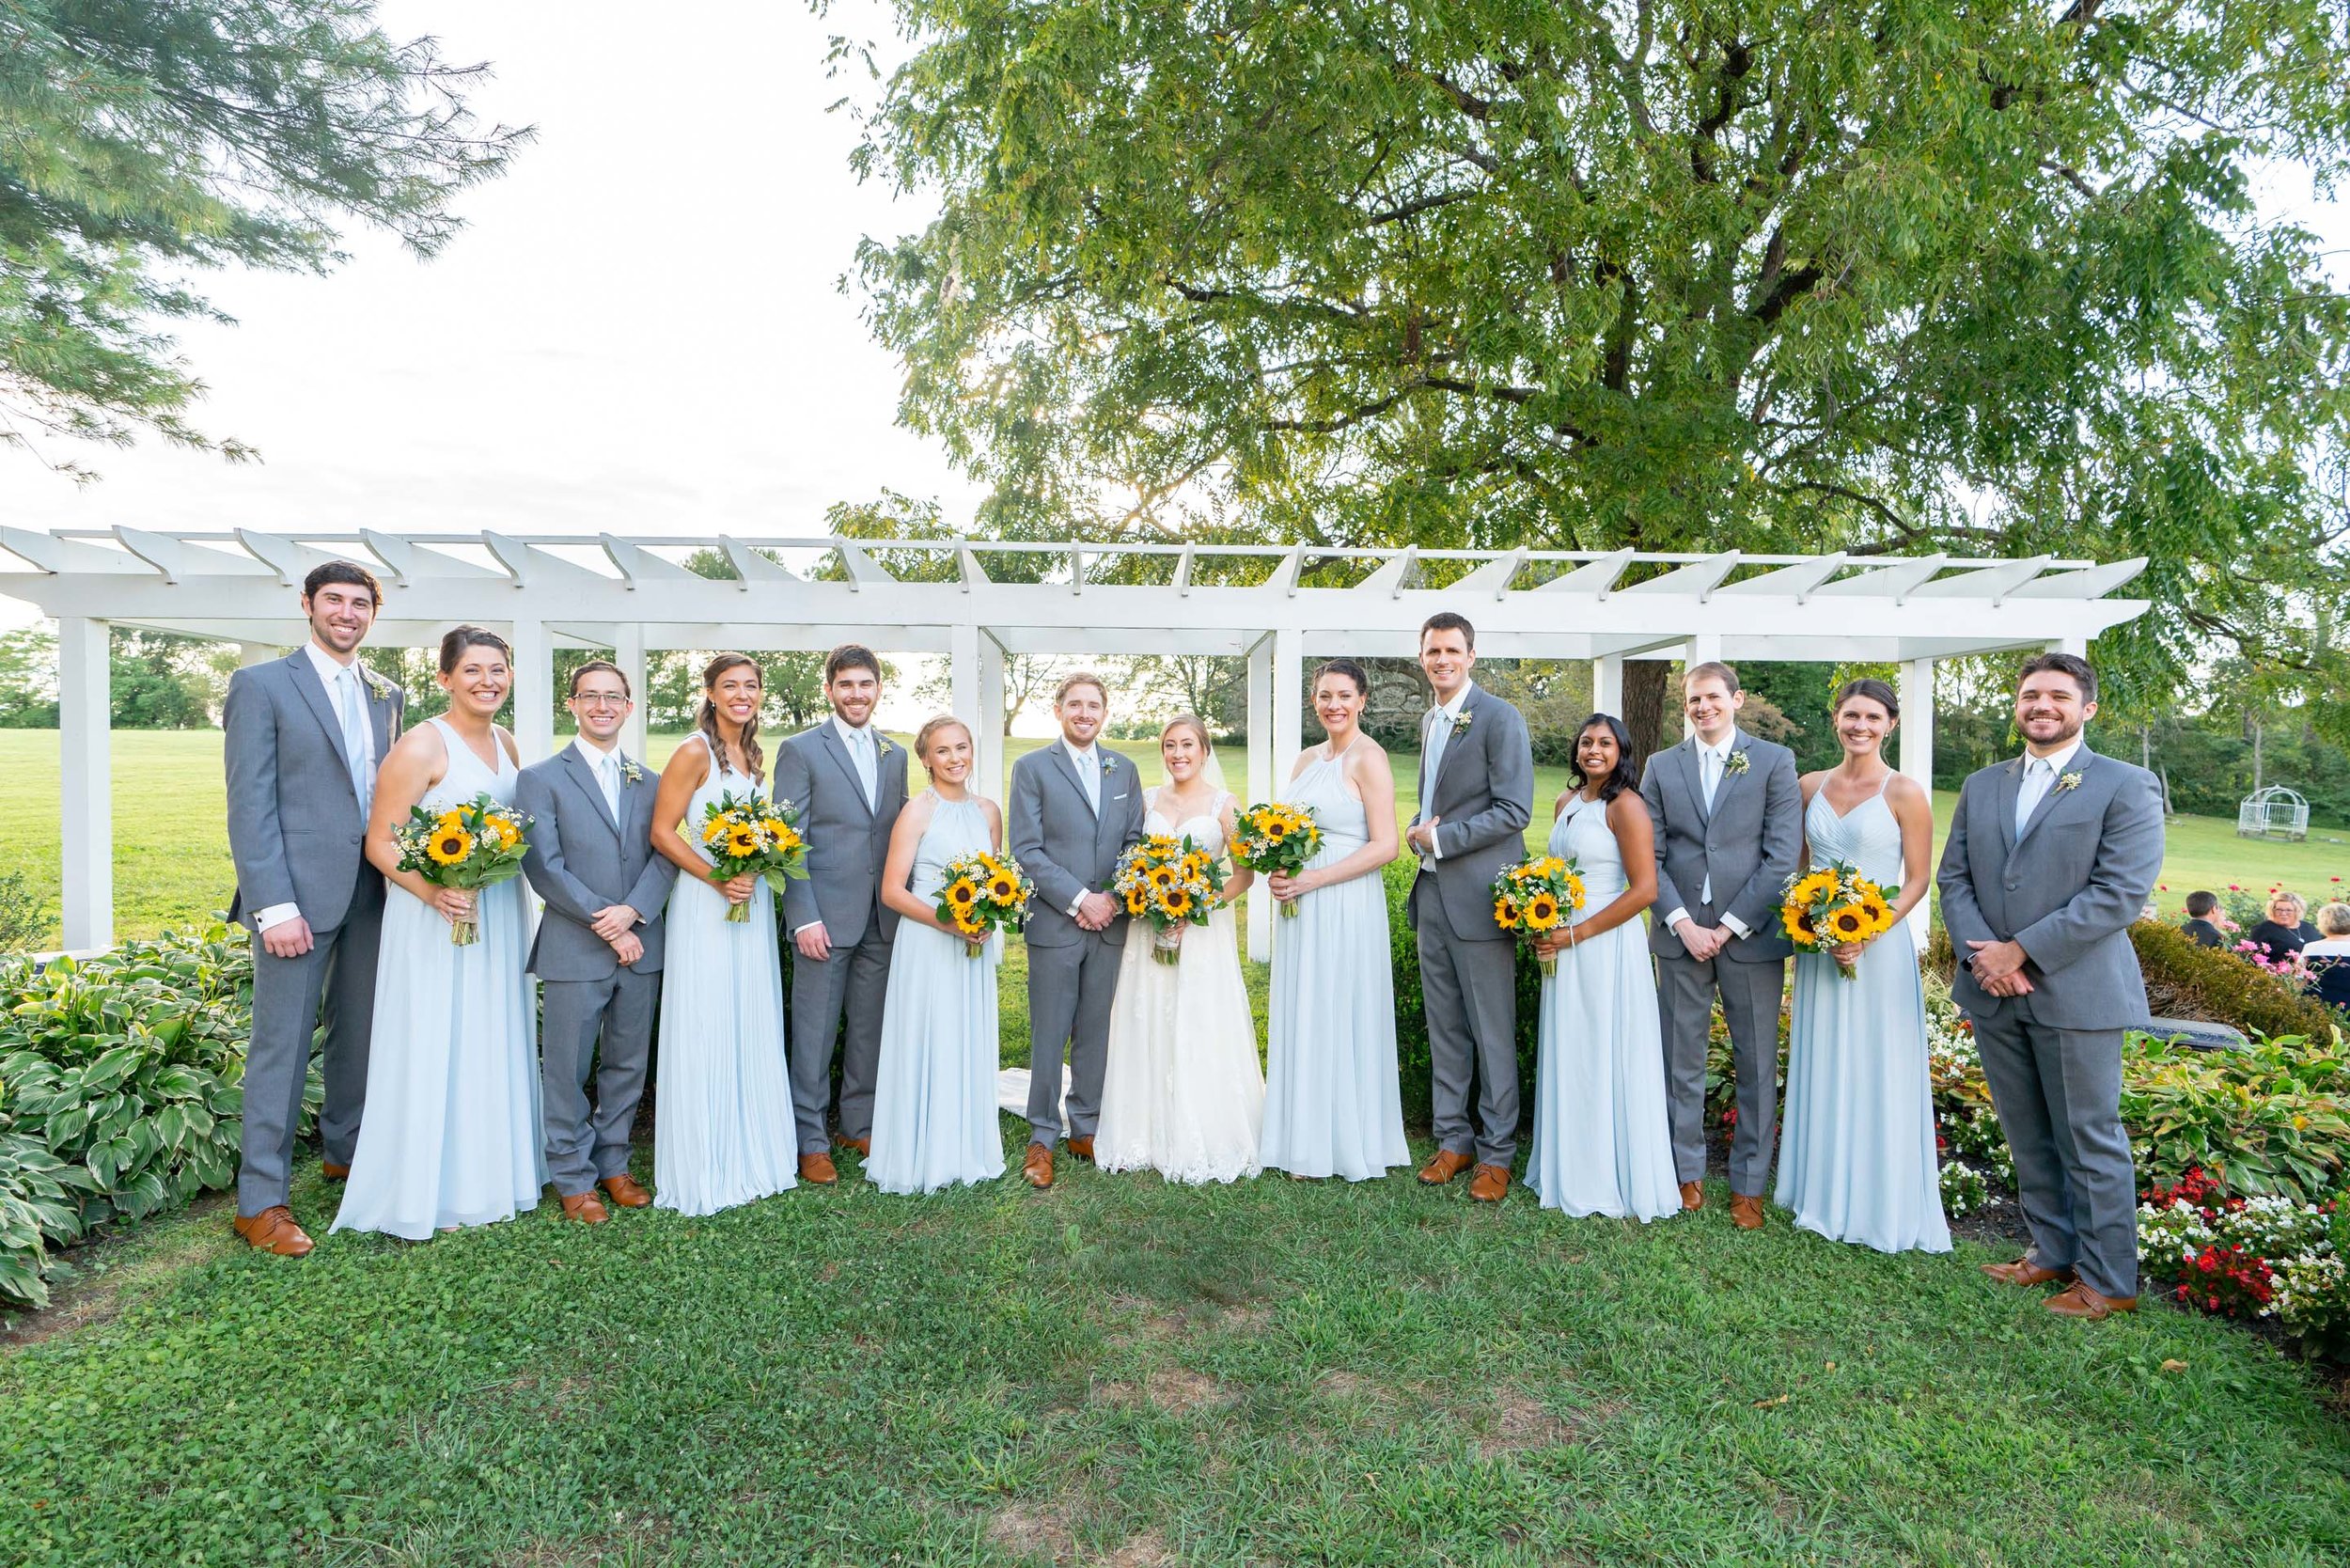 Bridal party with bridesmaids and groomsmen at Stone Manor Country Club